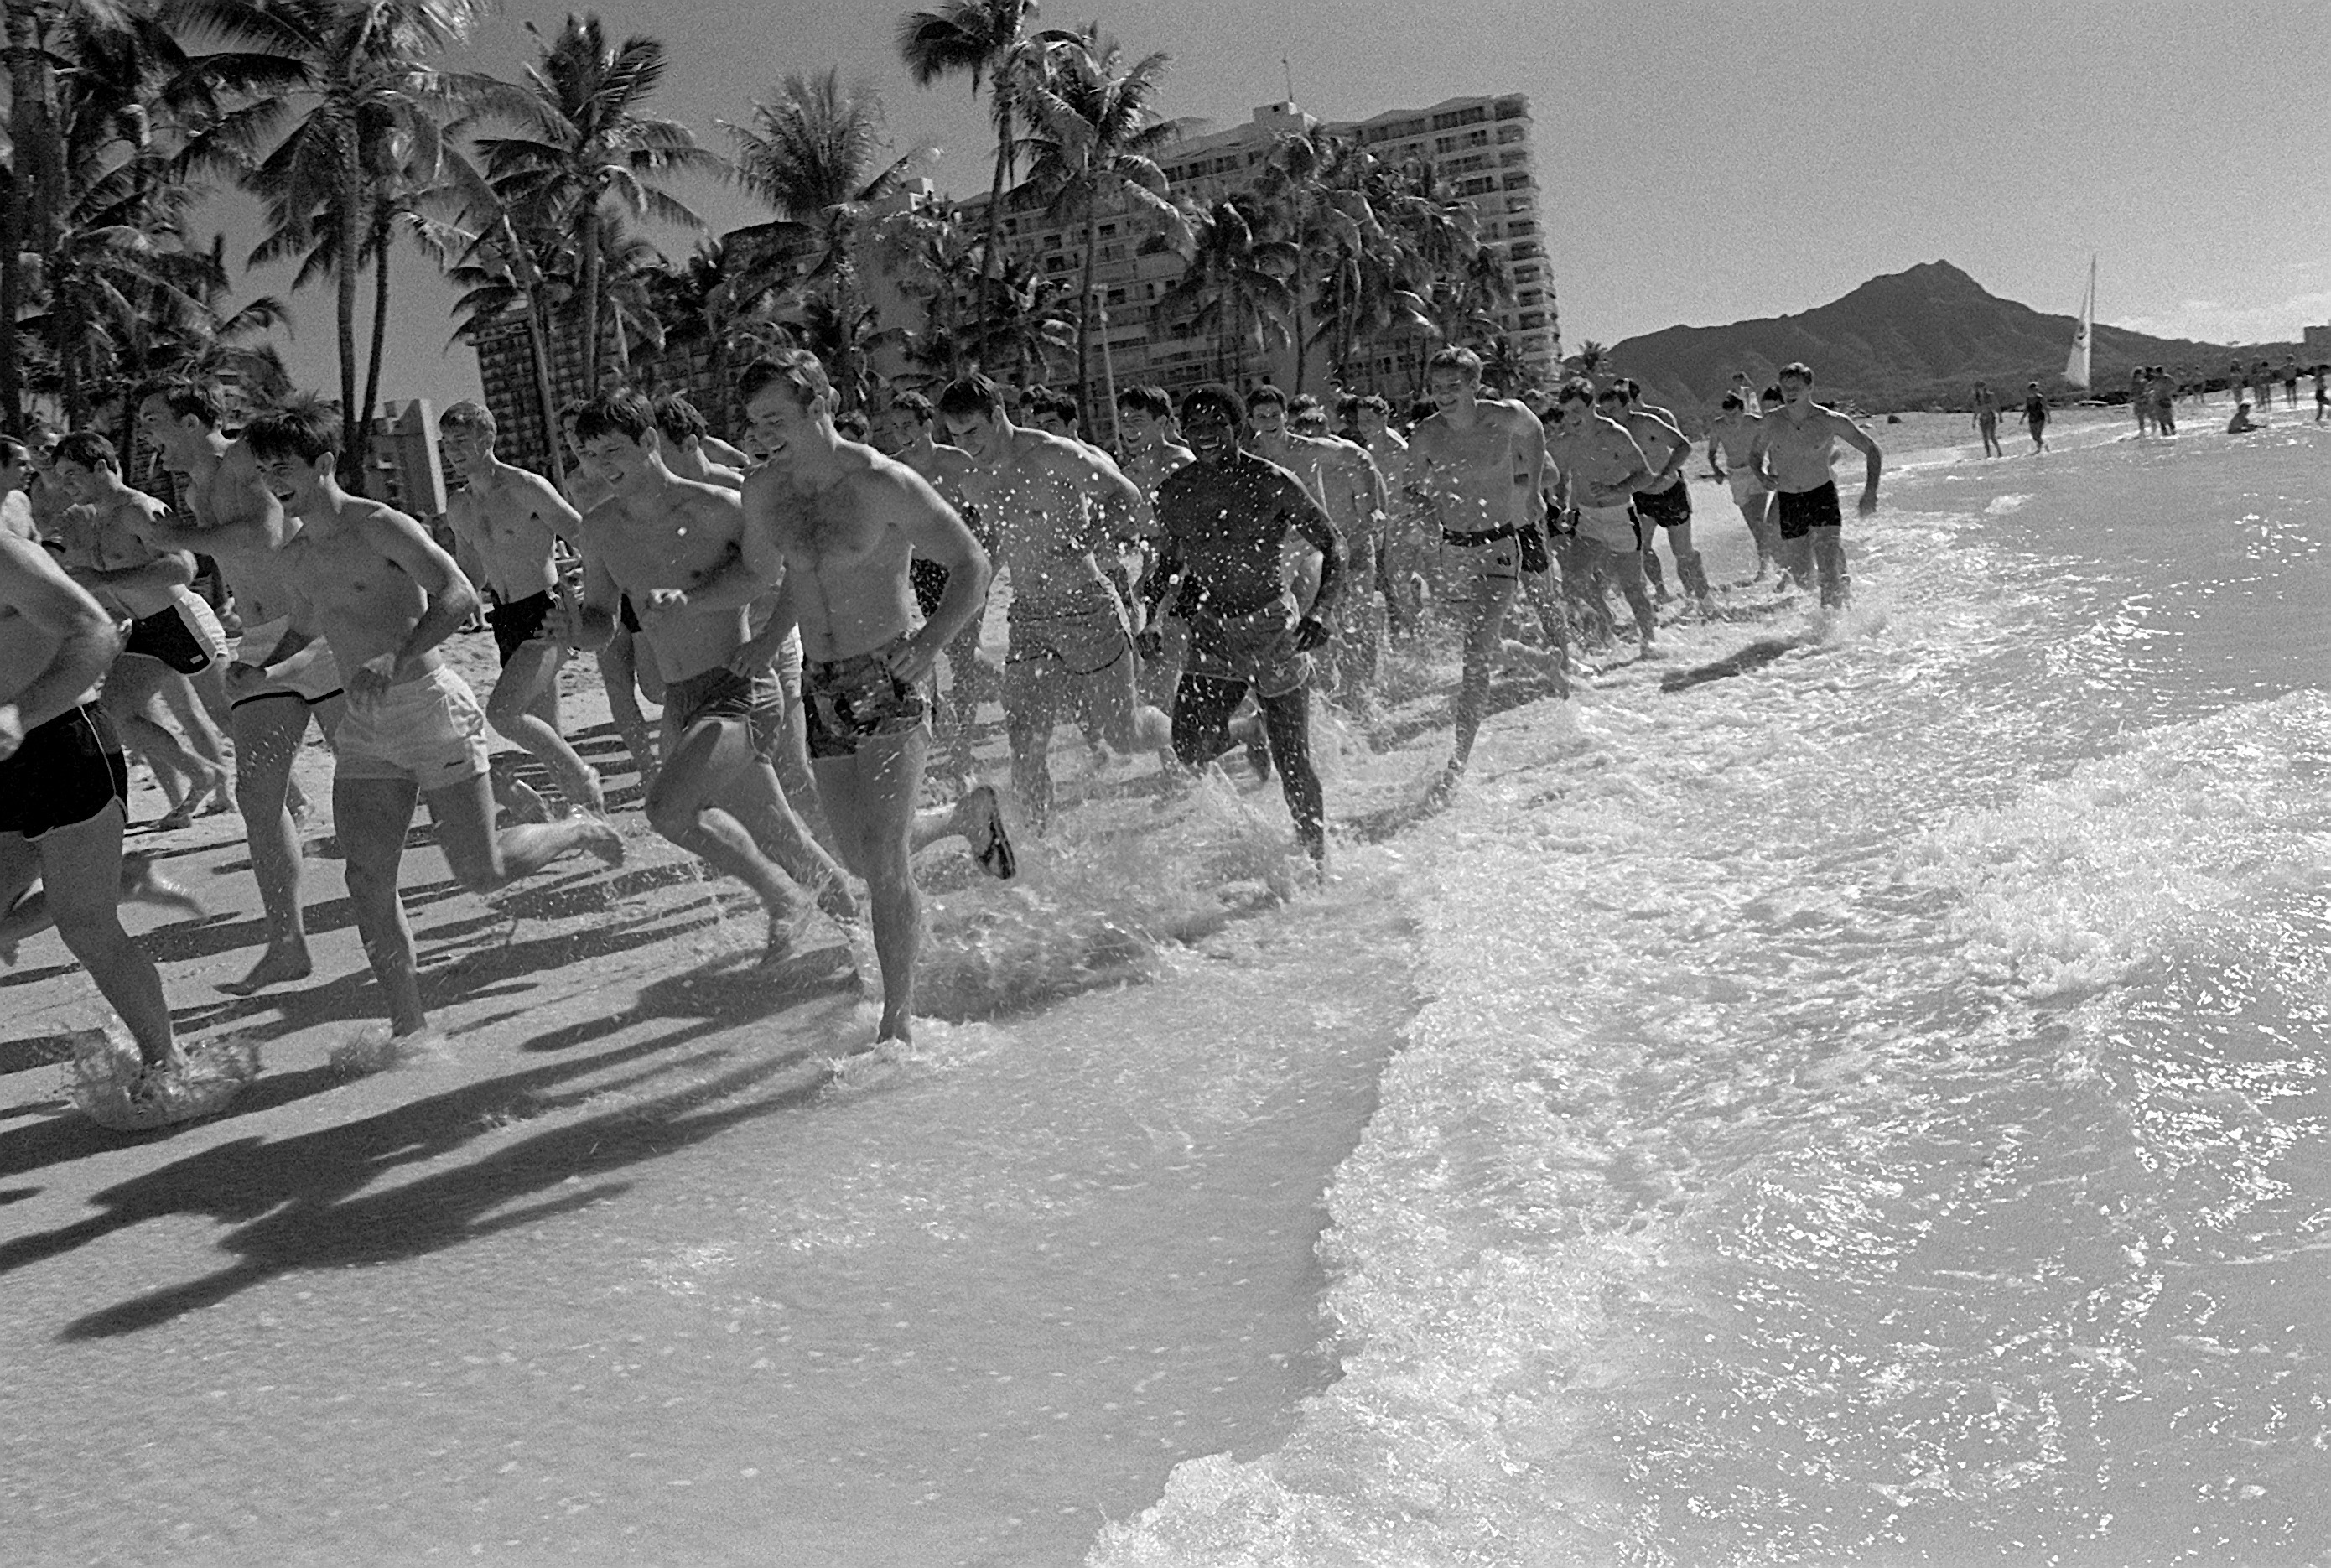 Members of the Air Force Academy football team job on Waikiki Beach before their game with the team from the University of Hawaii / Wikimedia Commons